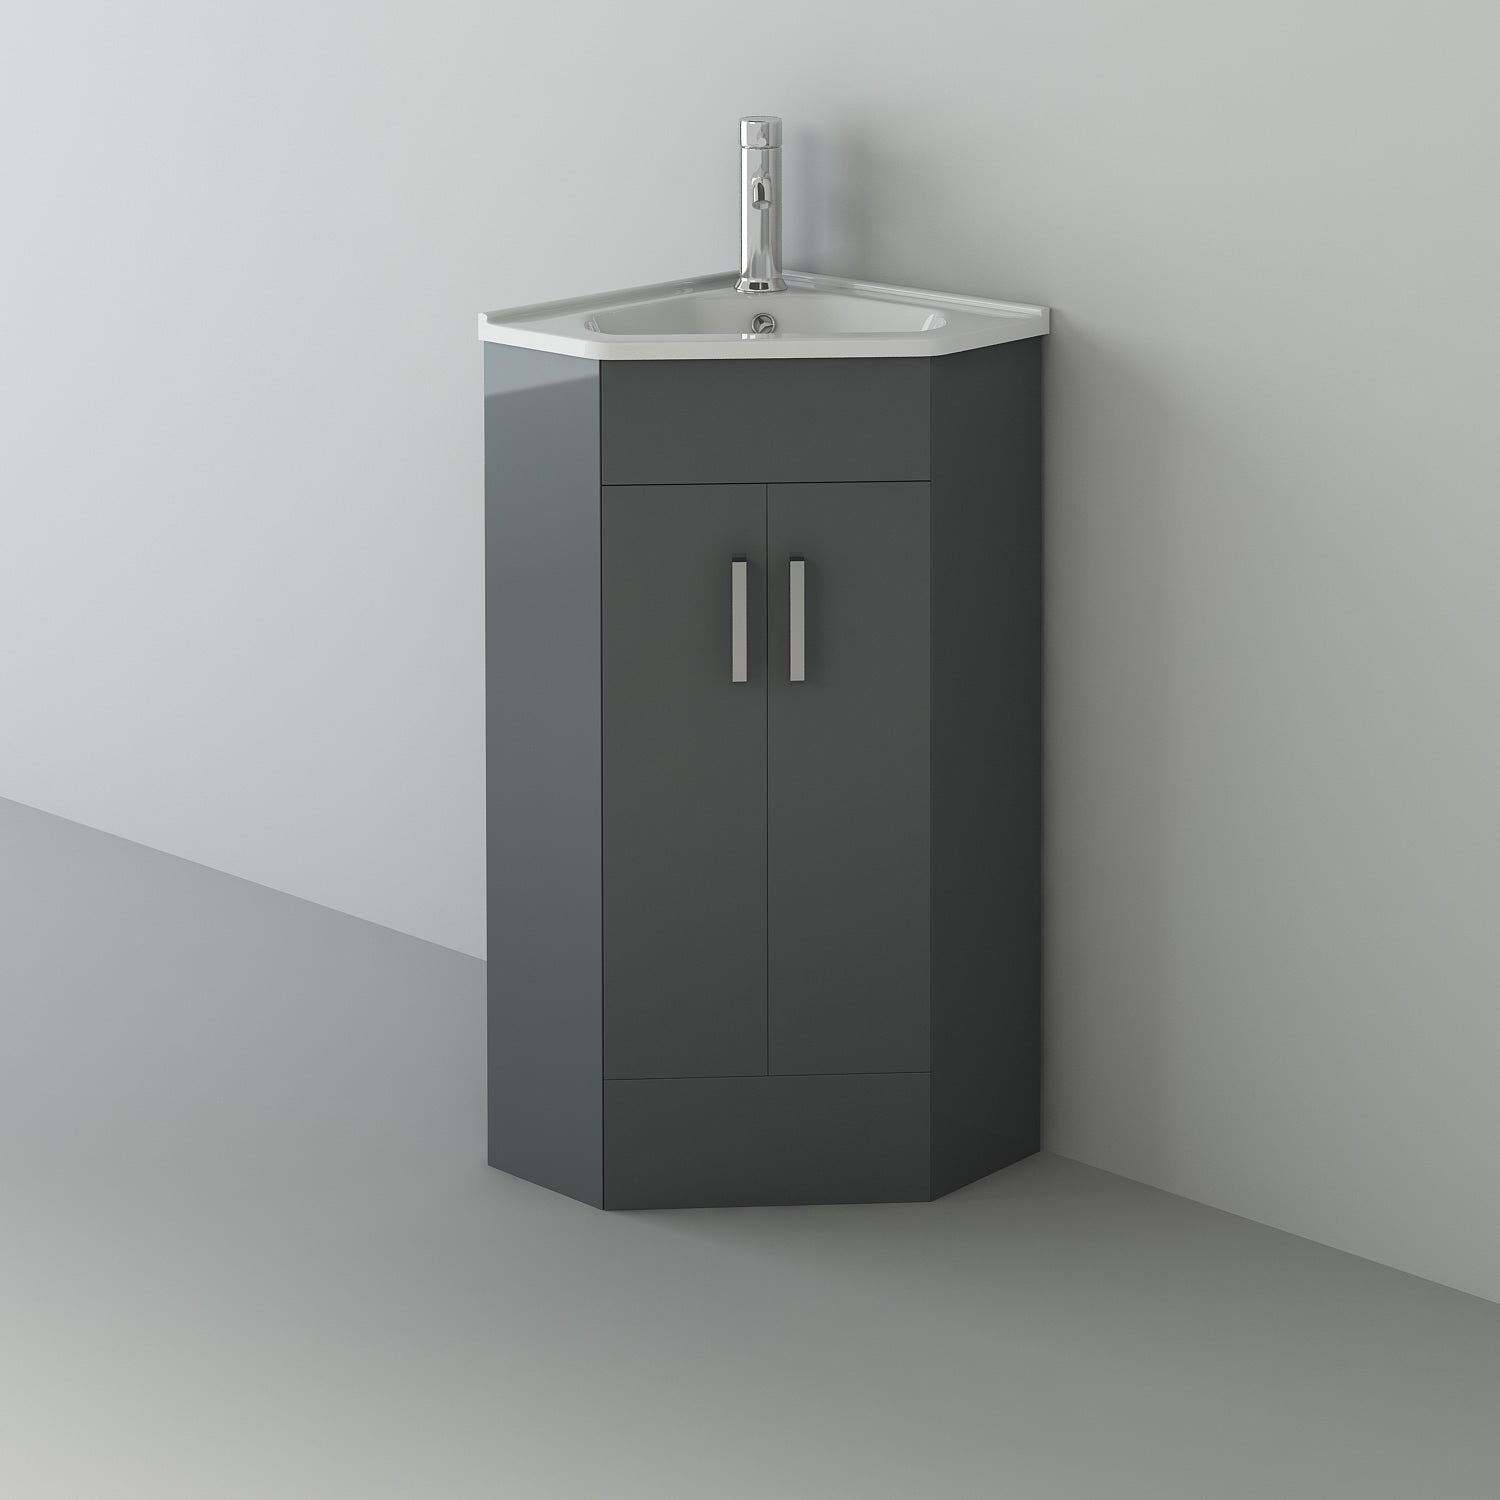 Compact Krona Corner Cloakroom Vanity Unit with Basin - 400mm Wide in white, ideal for small bathrooms. Modern, space-saving, and stylish UK bathroom solution.